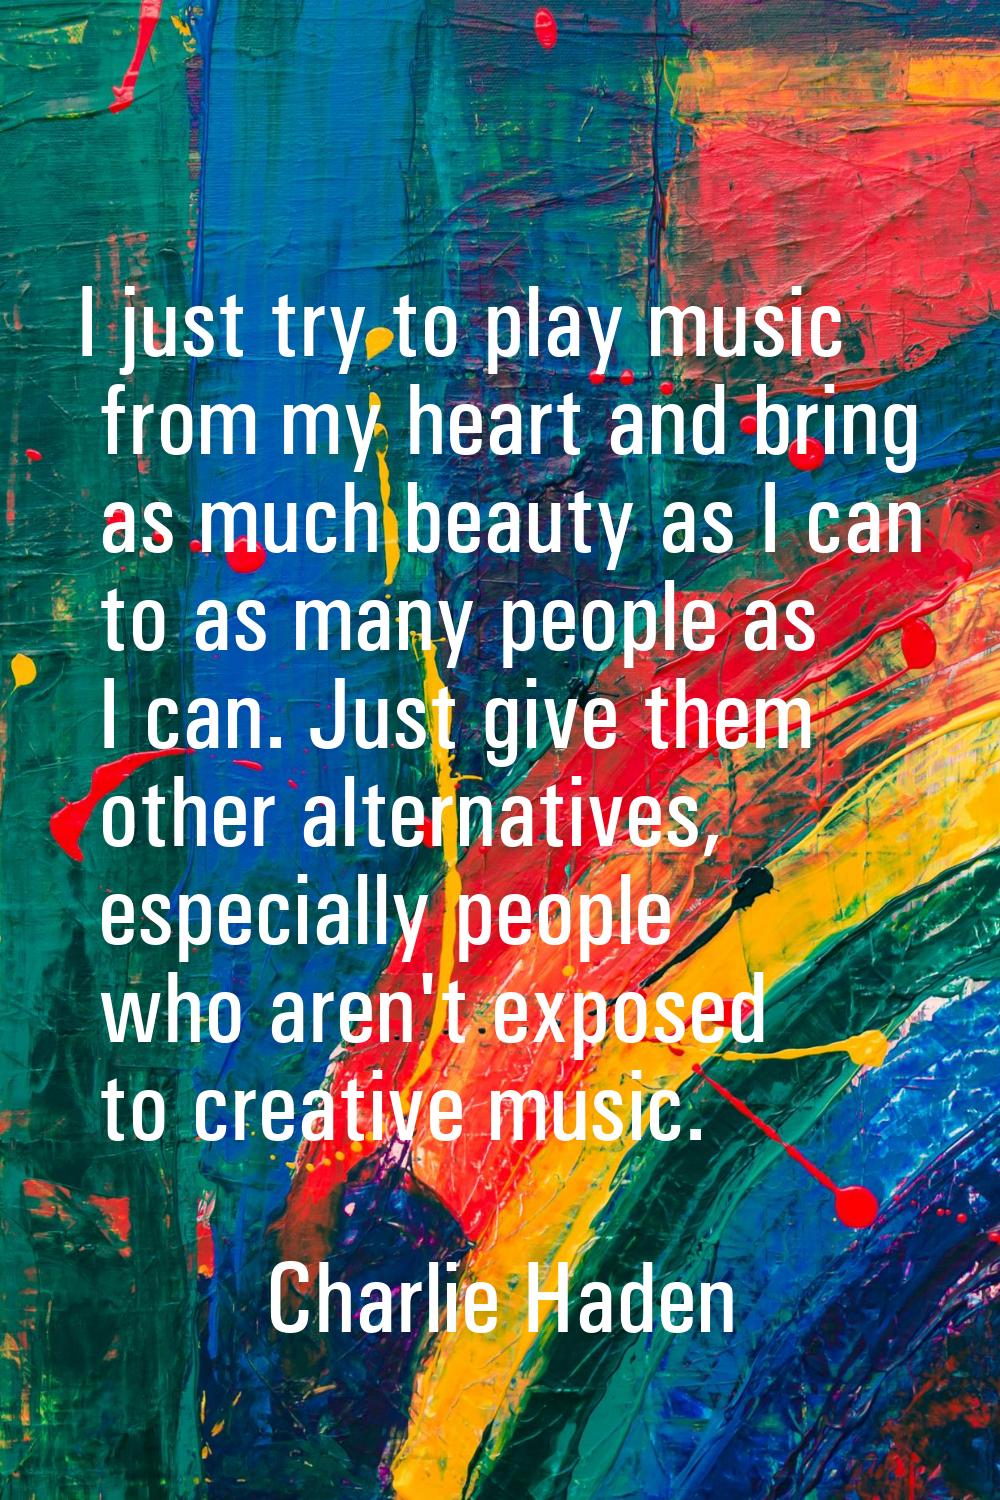 I just try to play music from my heart and bring as much beauty as I can to as many people as I can